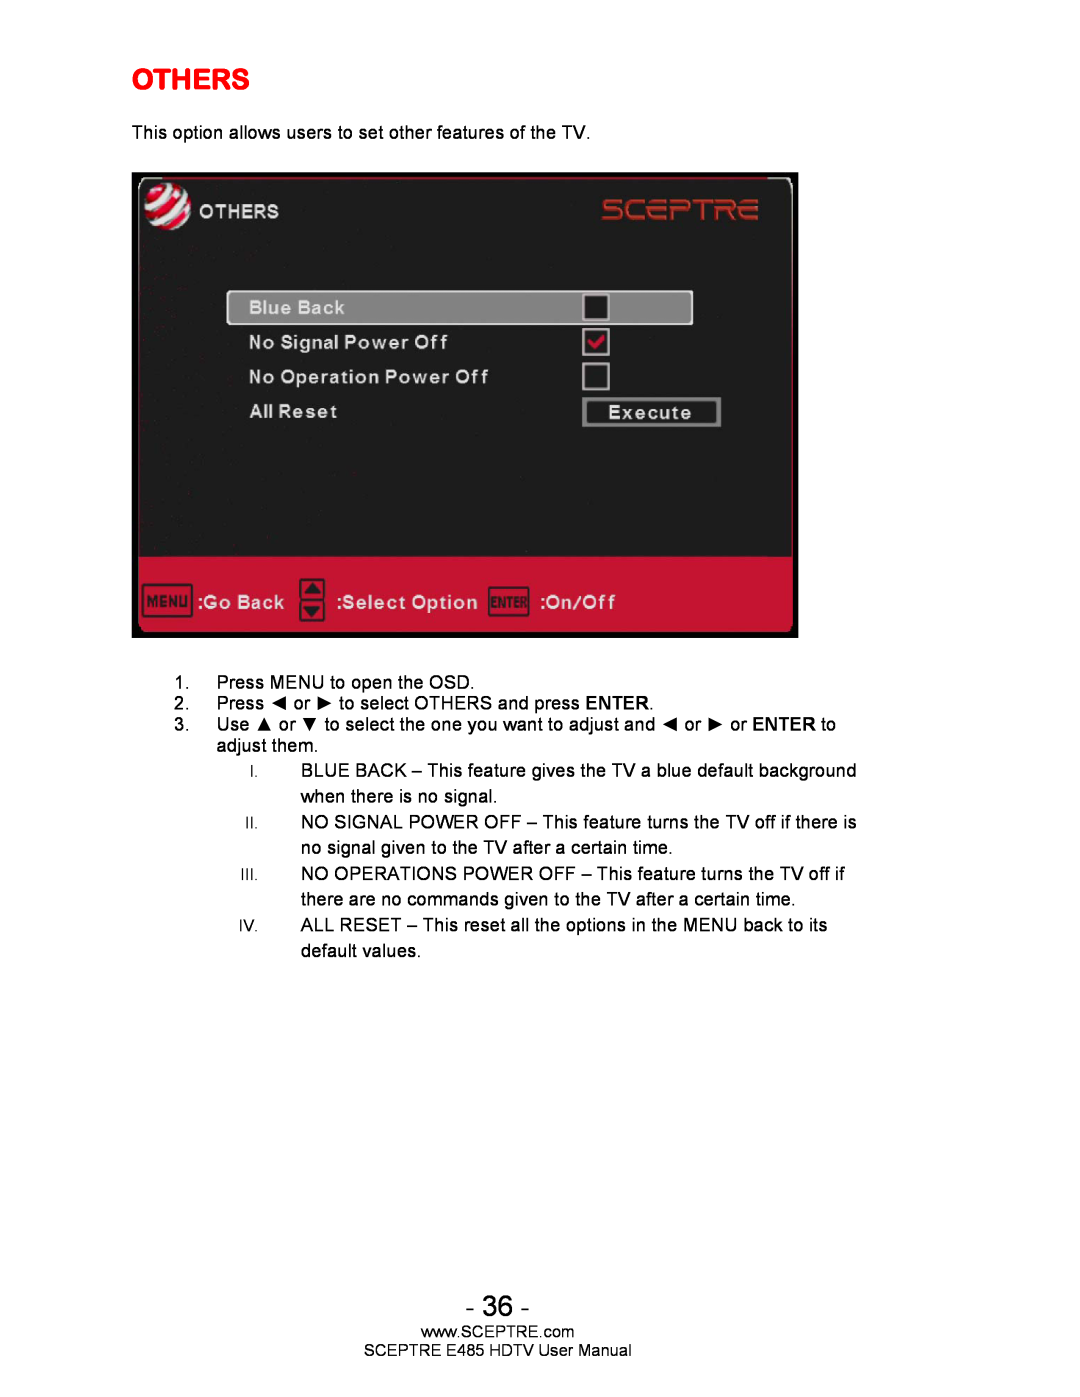 Sceptre Technologies E485 user manual Others 